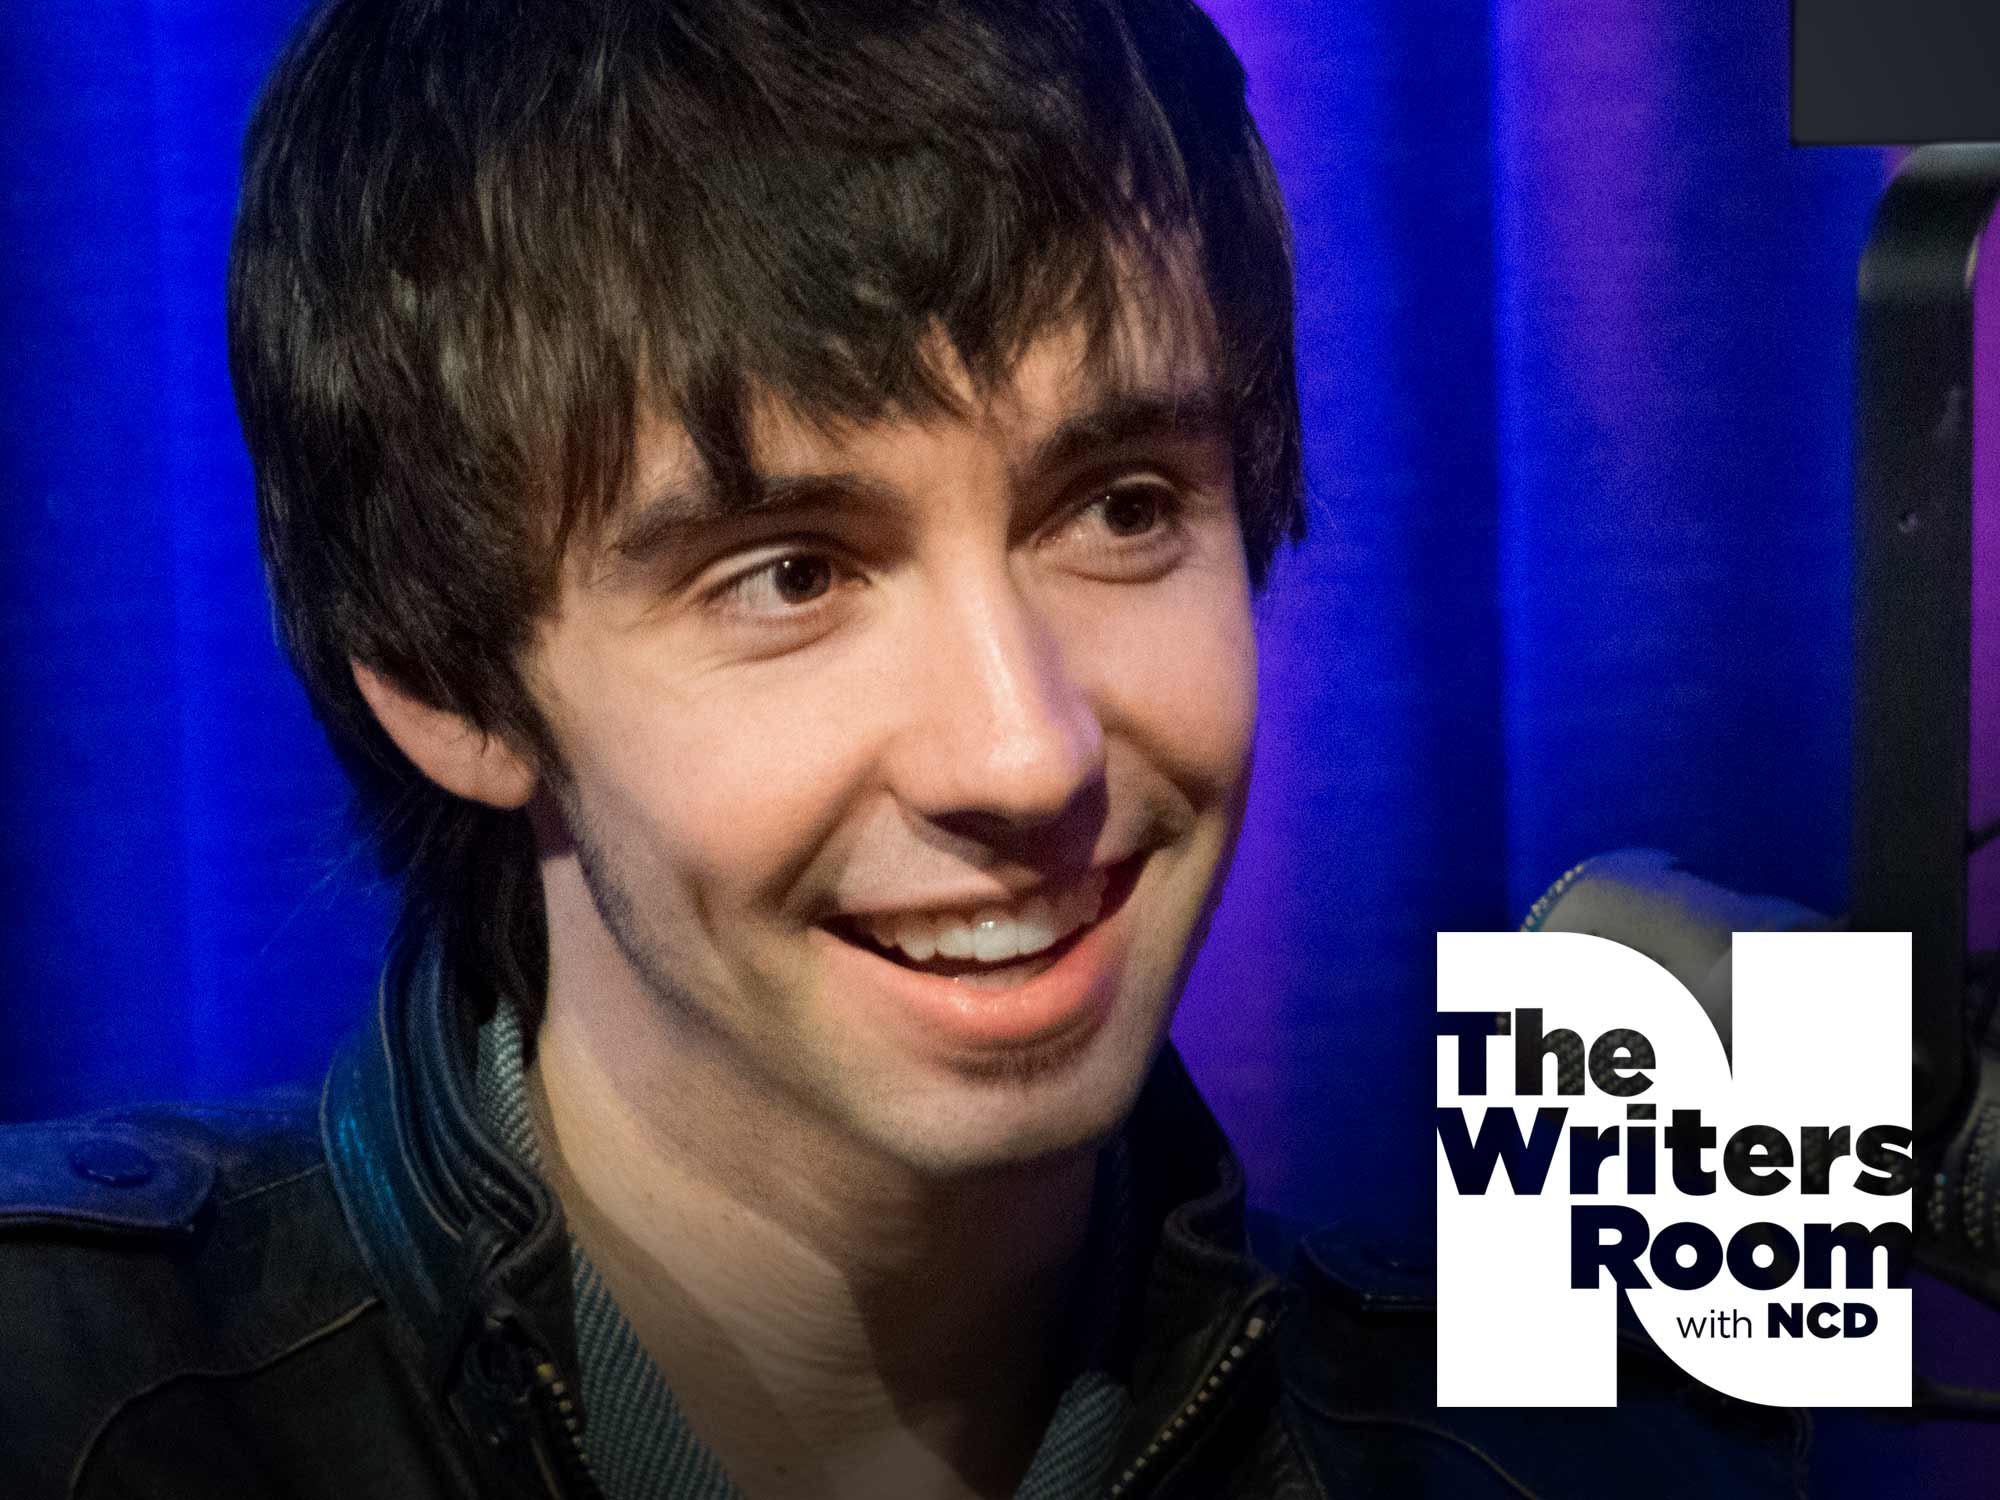 Mo Pitney Talks About Life as a New Dad, His Old Soul & Playing the Opry + Performs New Single, “Everywhere”